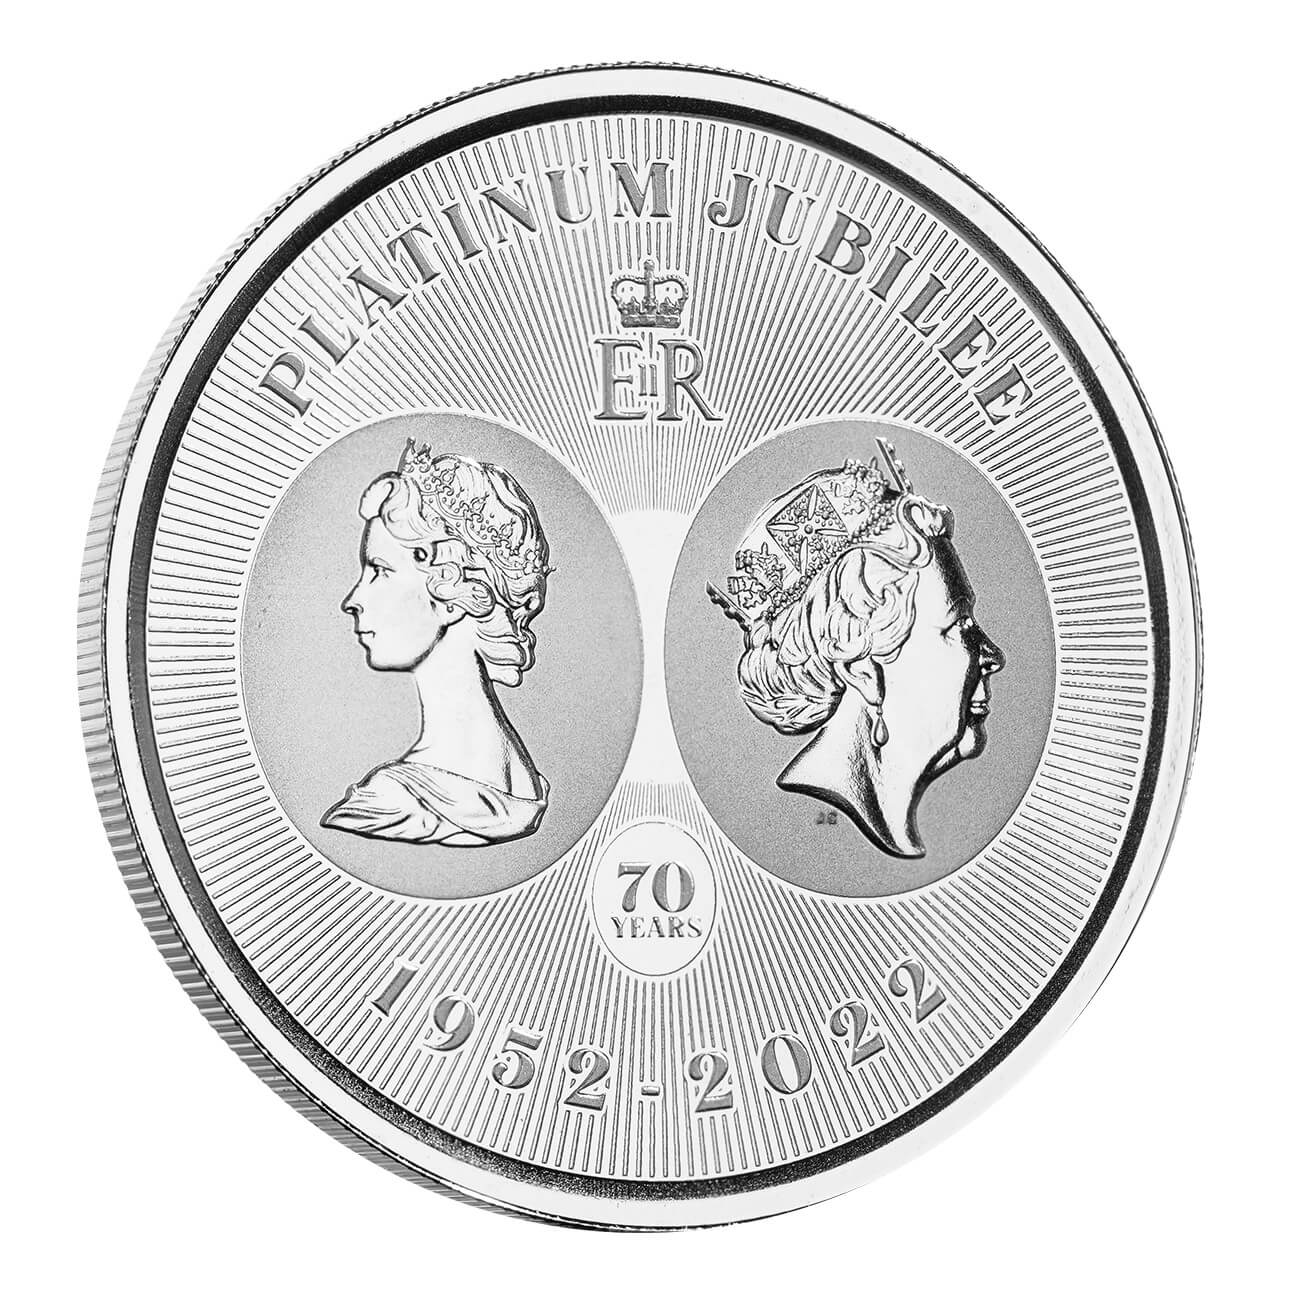 2022 Cayman Islands CIMA 1 Troy oz Silver Coin Queens 70th Platinum Jubilee Year Anniversary 05